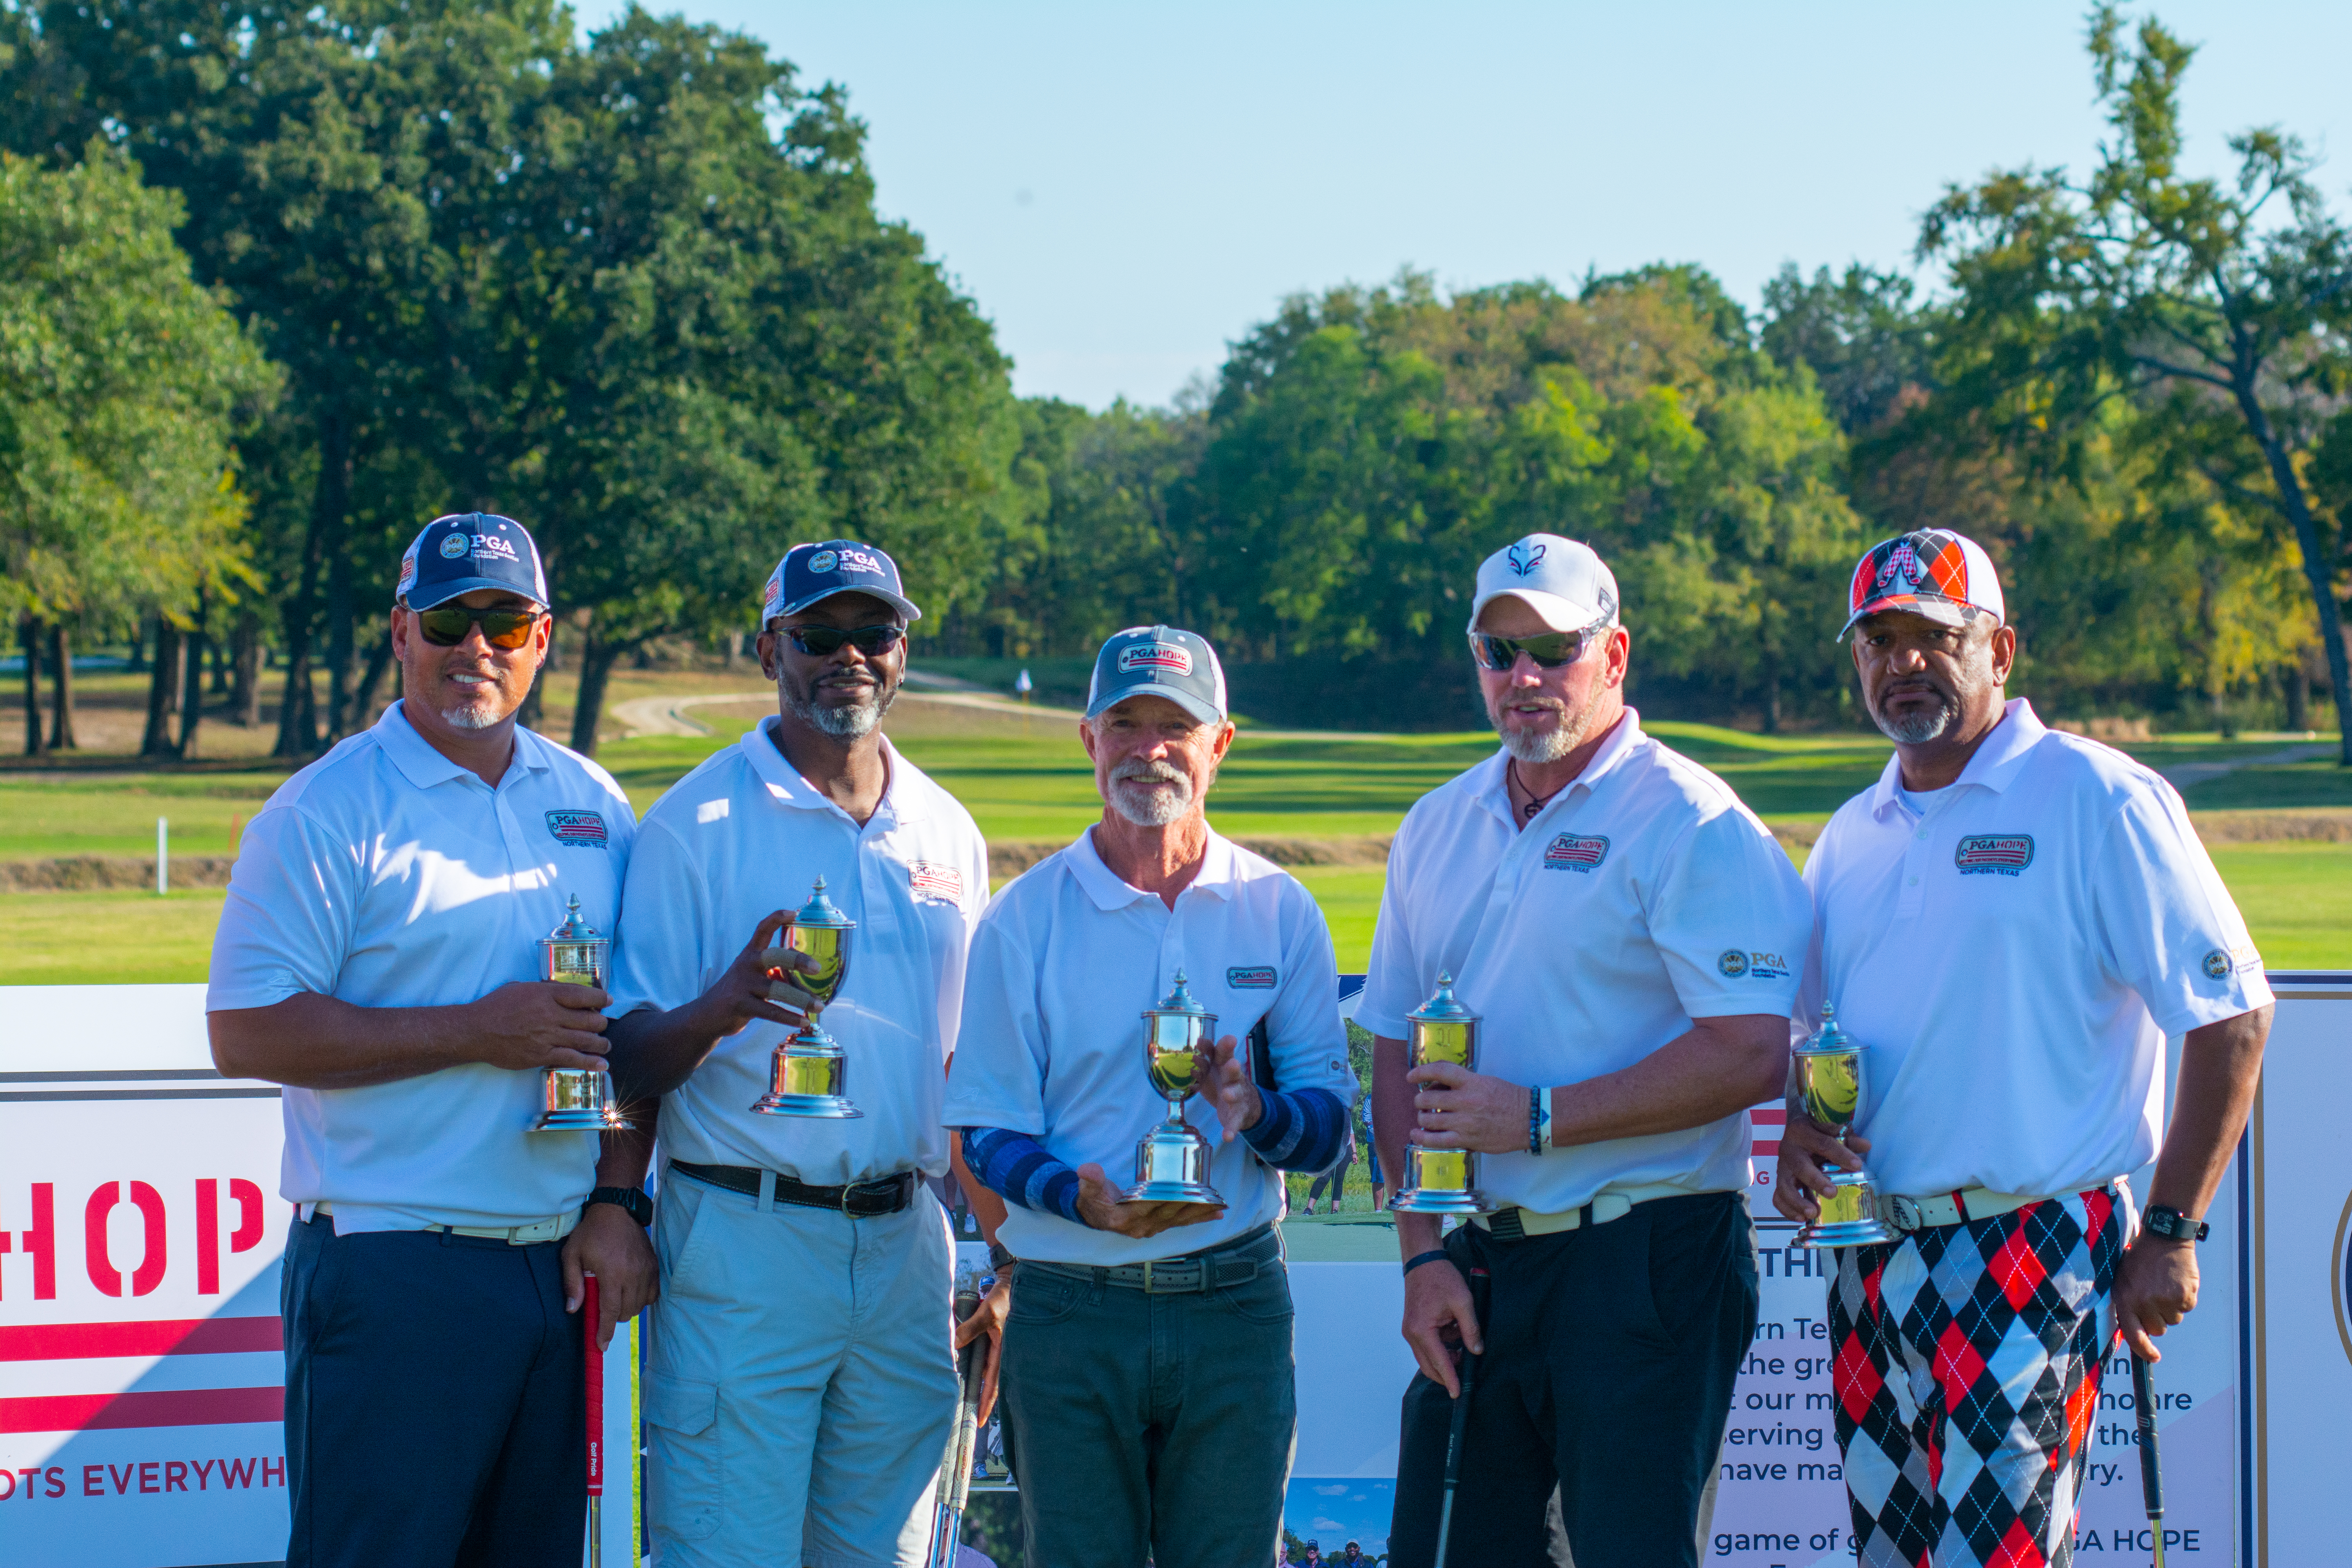 Whidbee and Williamson (second, third from left) and their winning Northern Texas PGA HOPE Cup team.